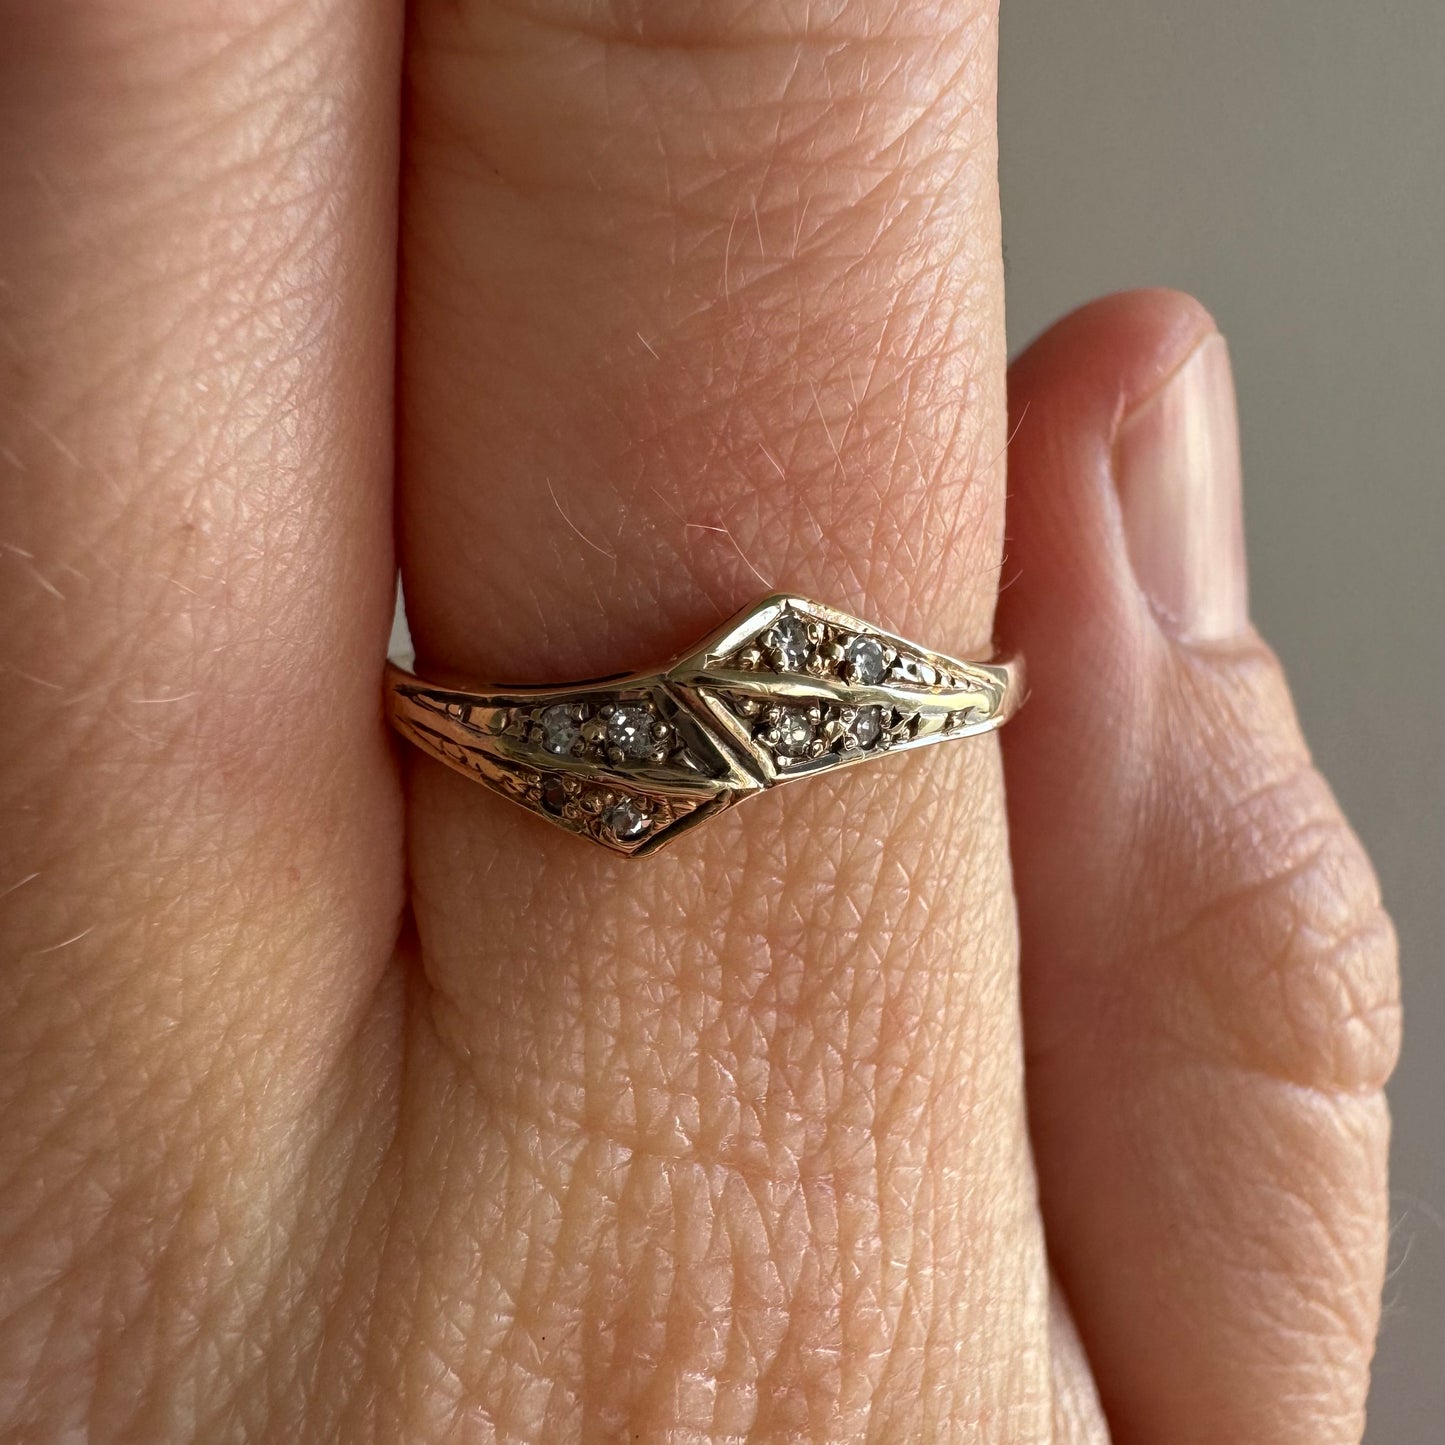 P R E - L O V E D // subtle serpents / 9k and diamond snake bypass ring / size 6.75